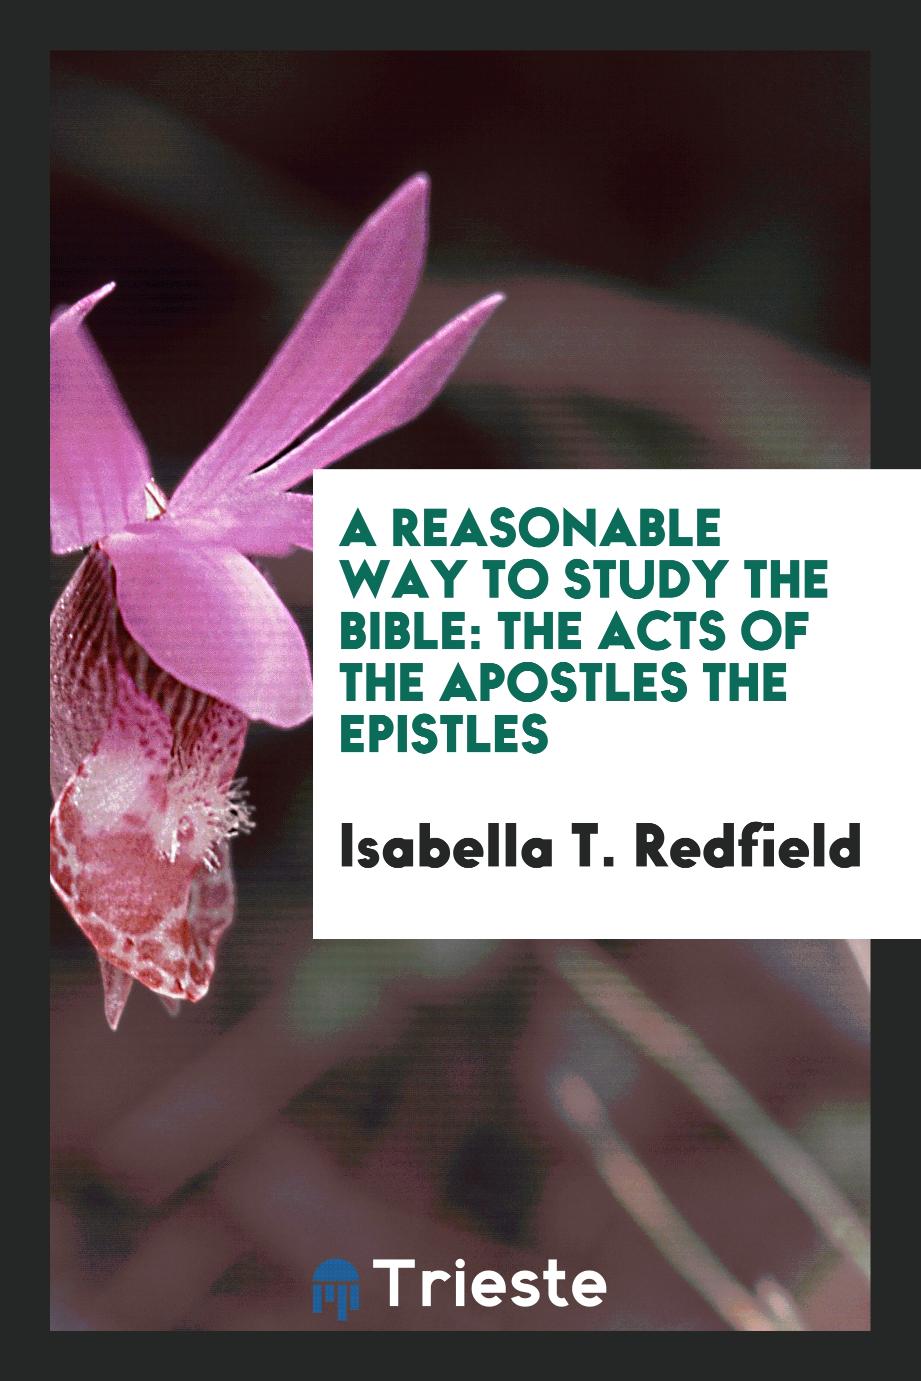 A Reasonable Way to Study the Bible: The Acts of the Apostles the Epistles